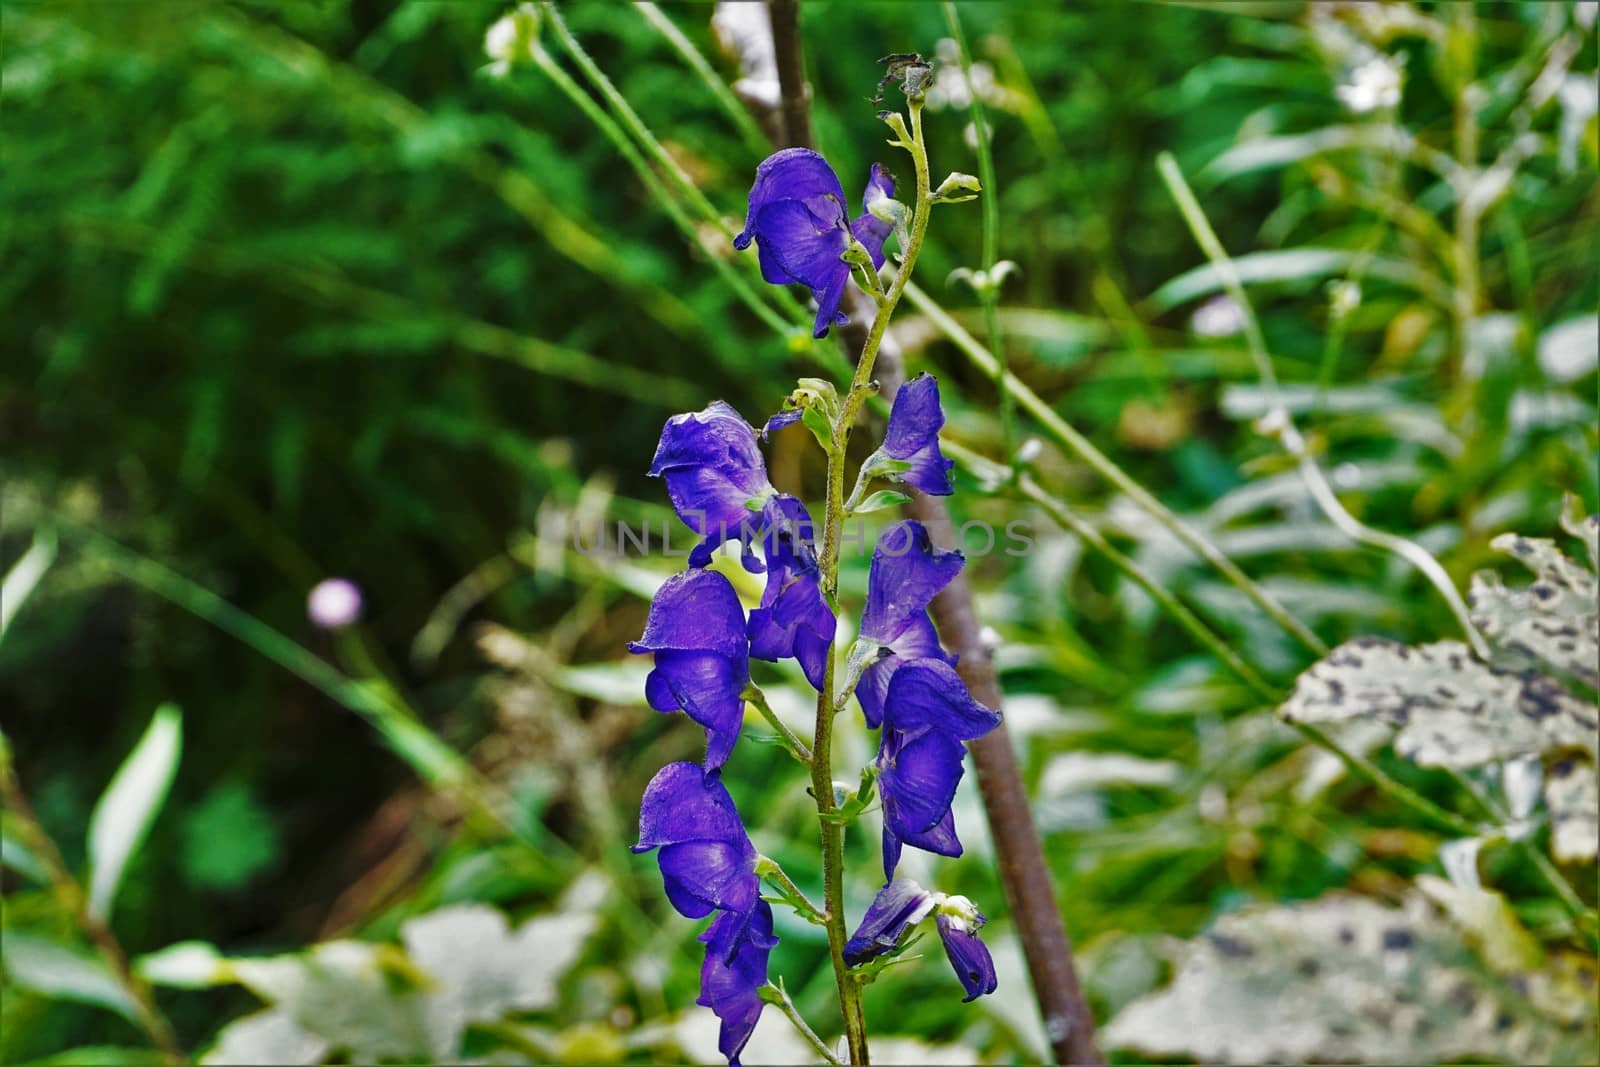 Blossoms of Wolfsbane spotted in a forest in France